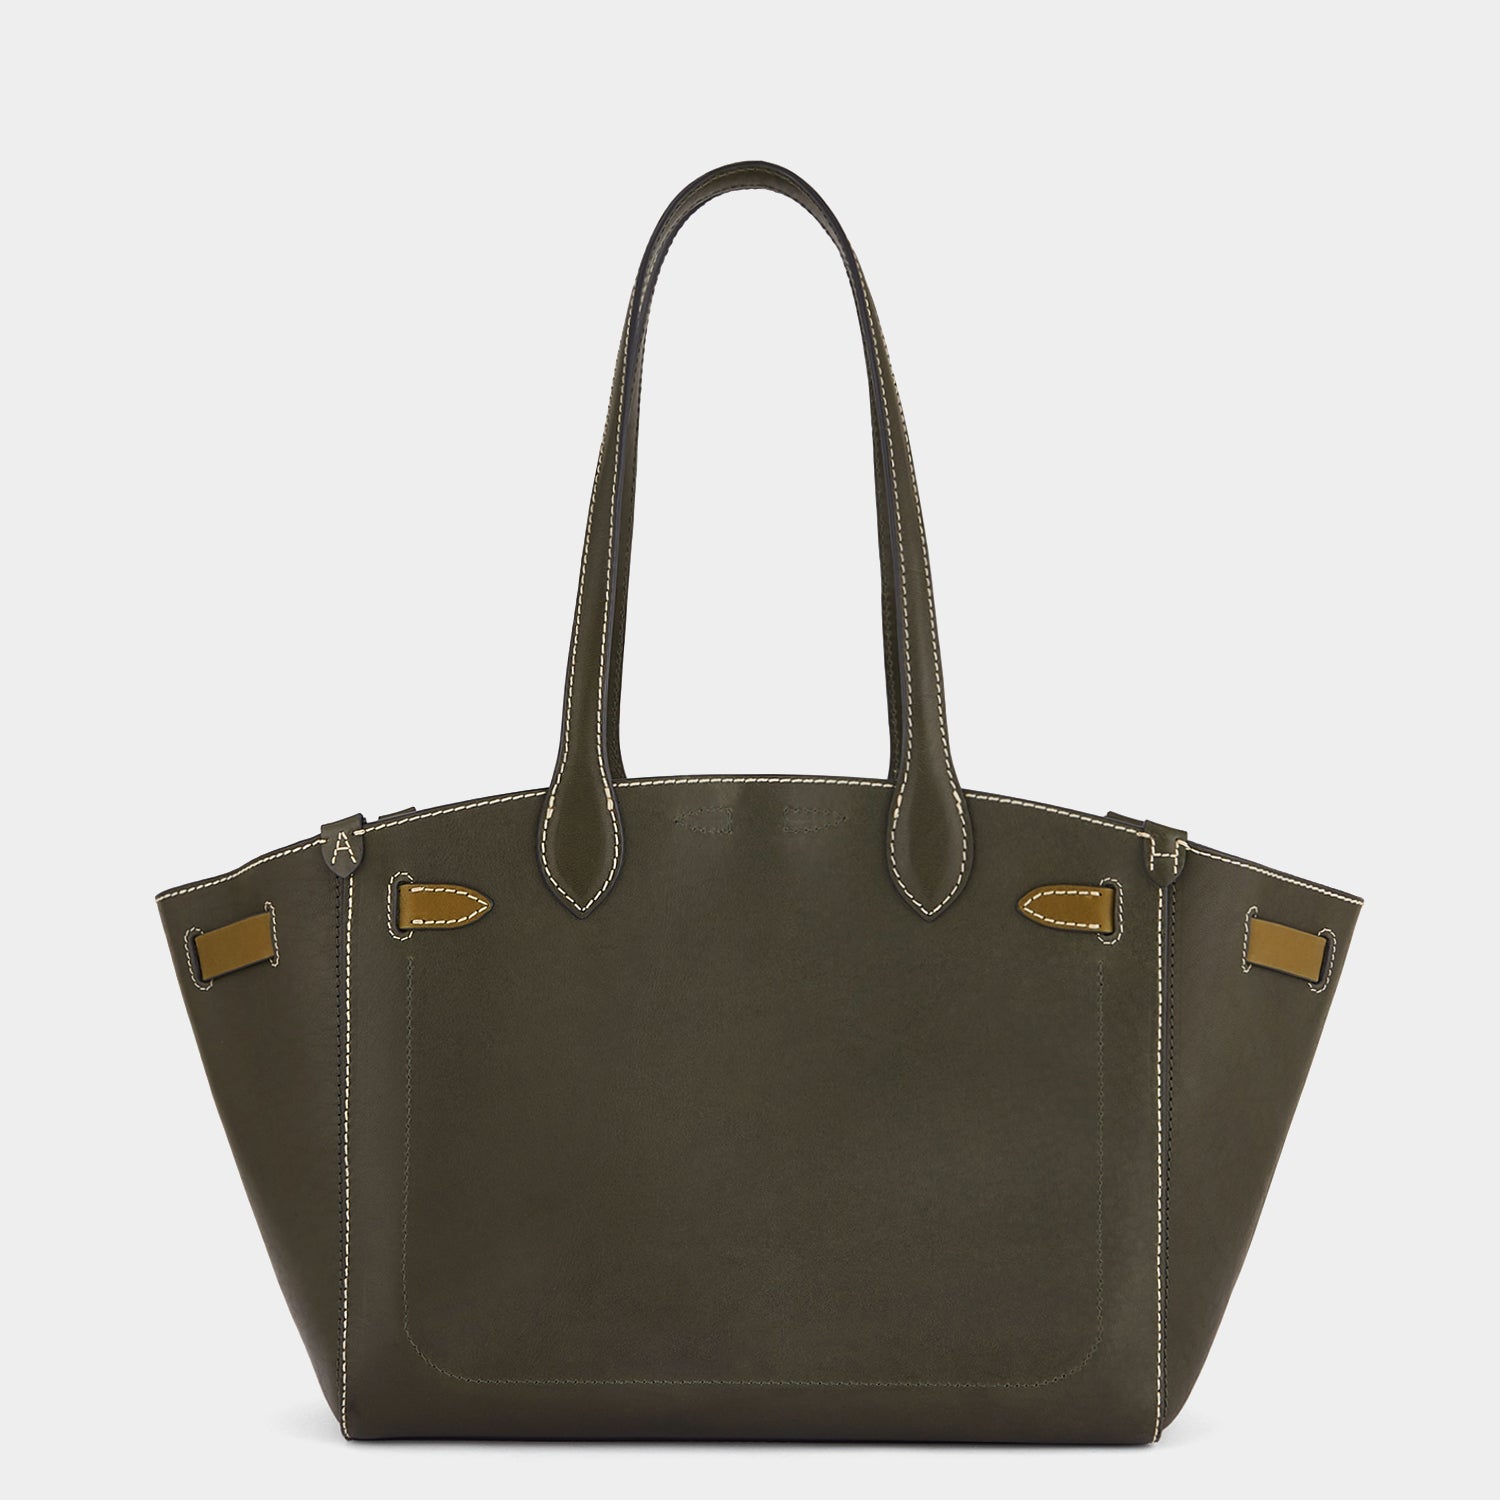 Return to Nature Tote Small -

                  
                    Compostable Leather in Dark Olive -
                  

                  Anya Hindmarch US
